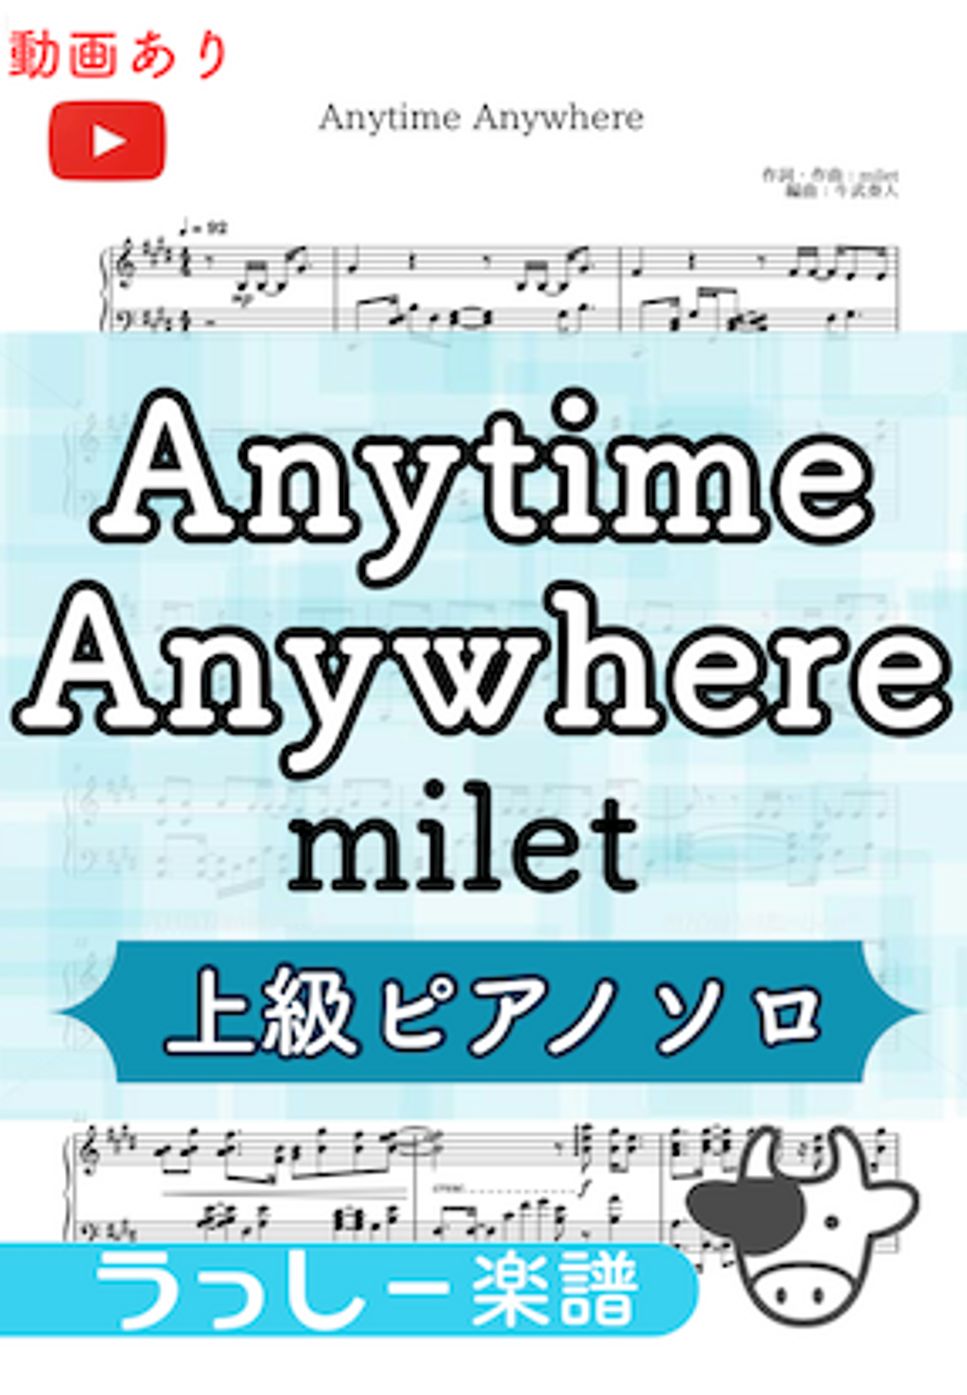 milet - Anytime Anywhere (アニメ『葬送のフリーレン』ED) by 牛武奏人